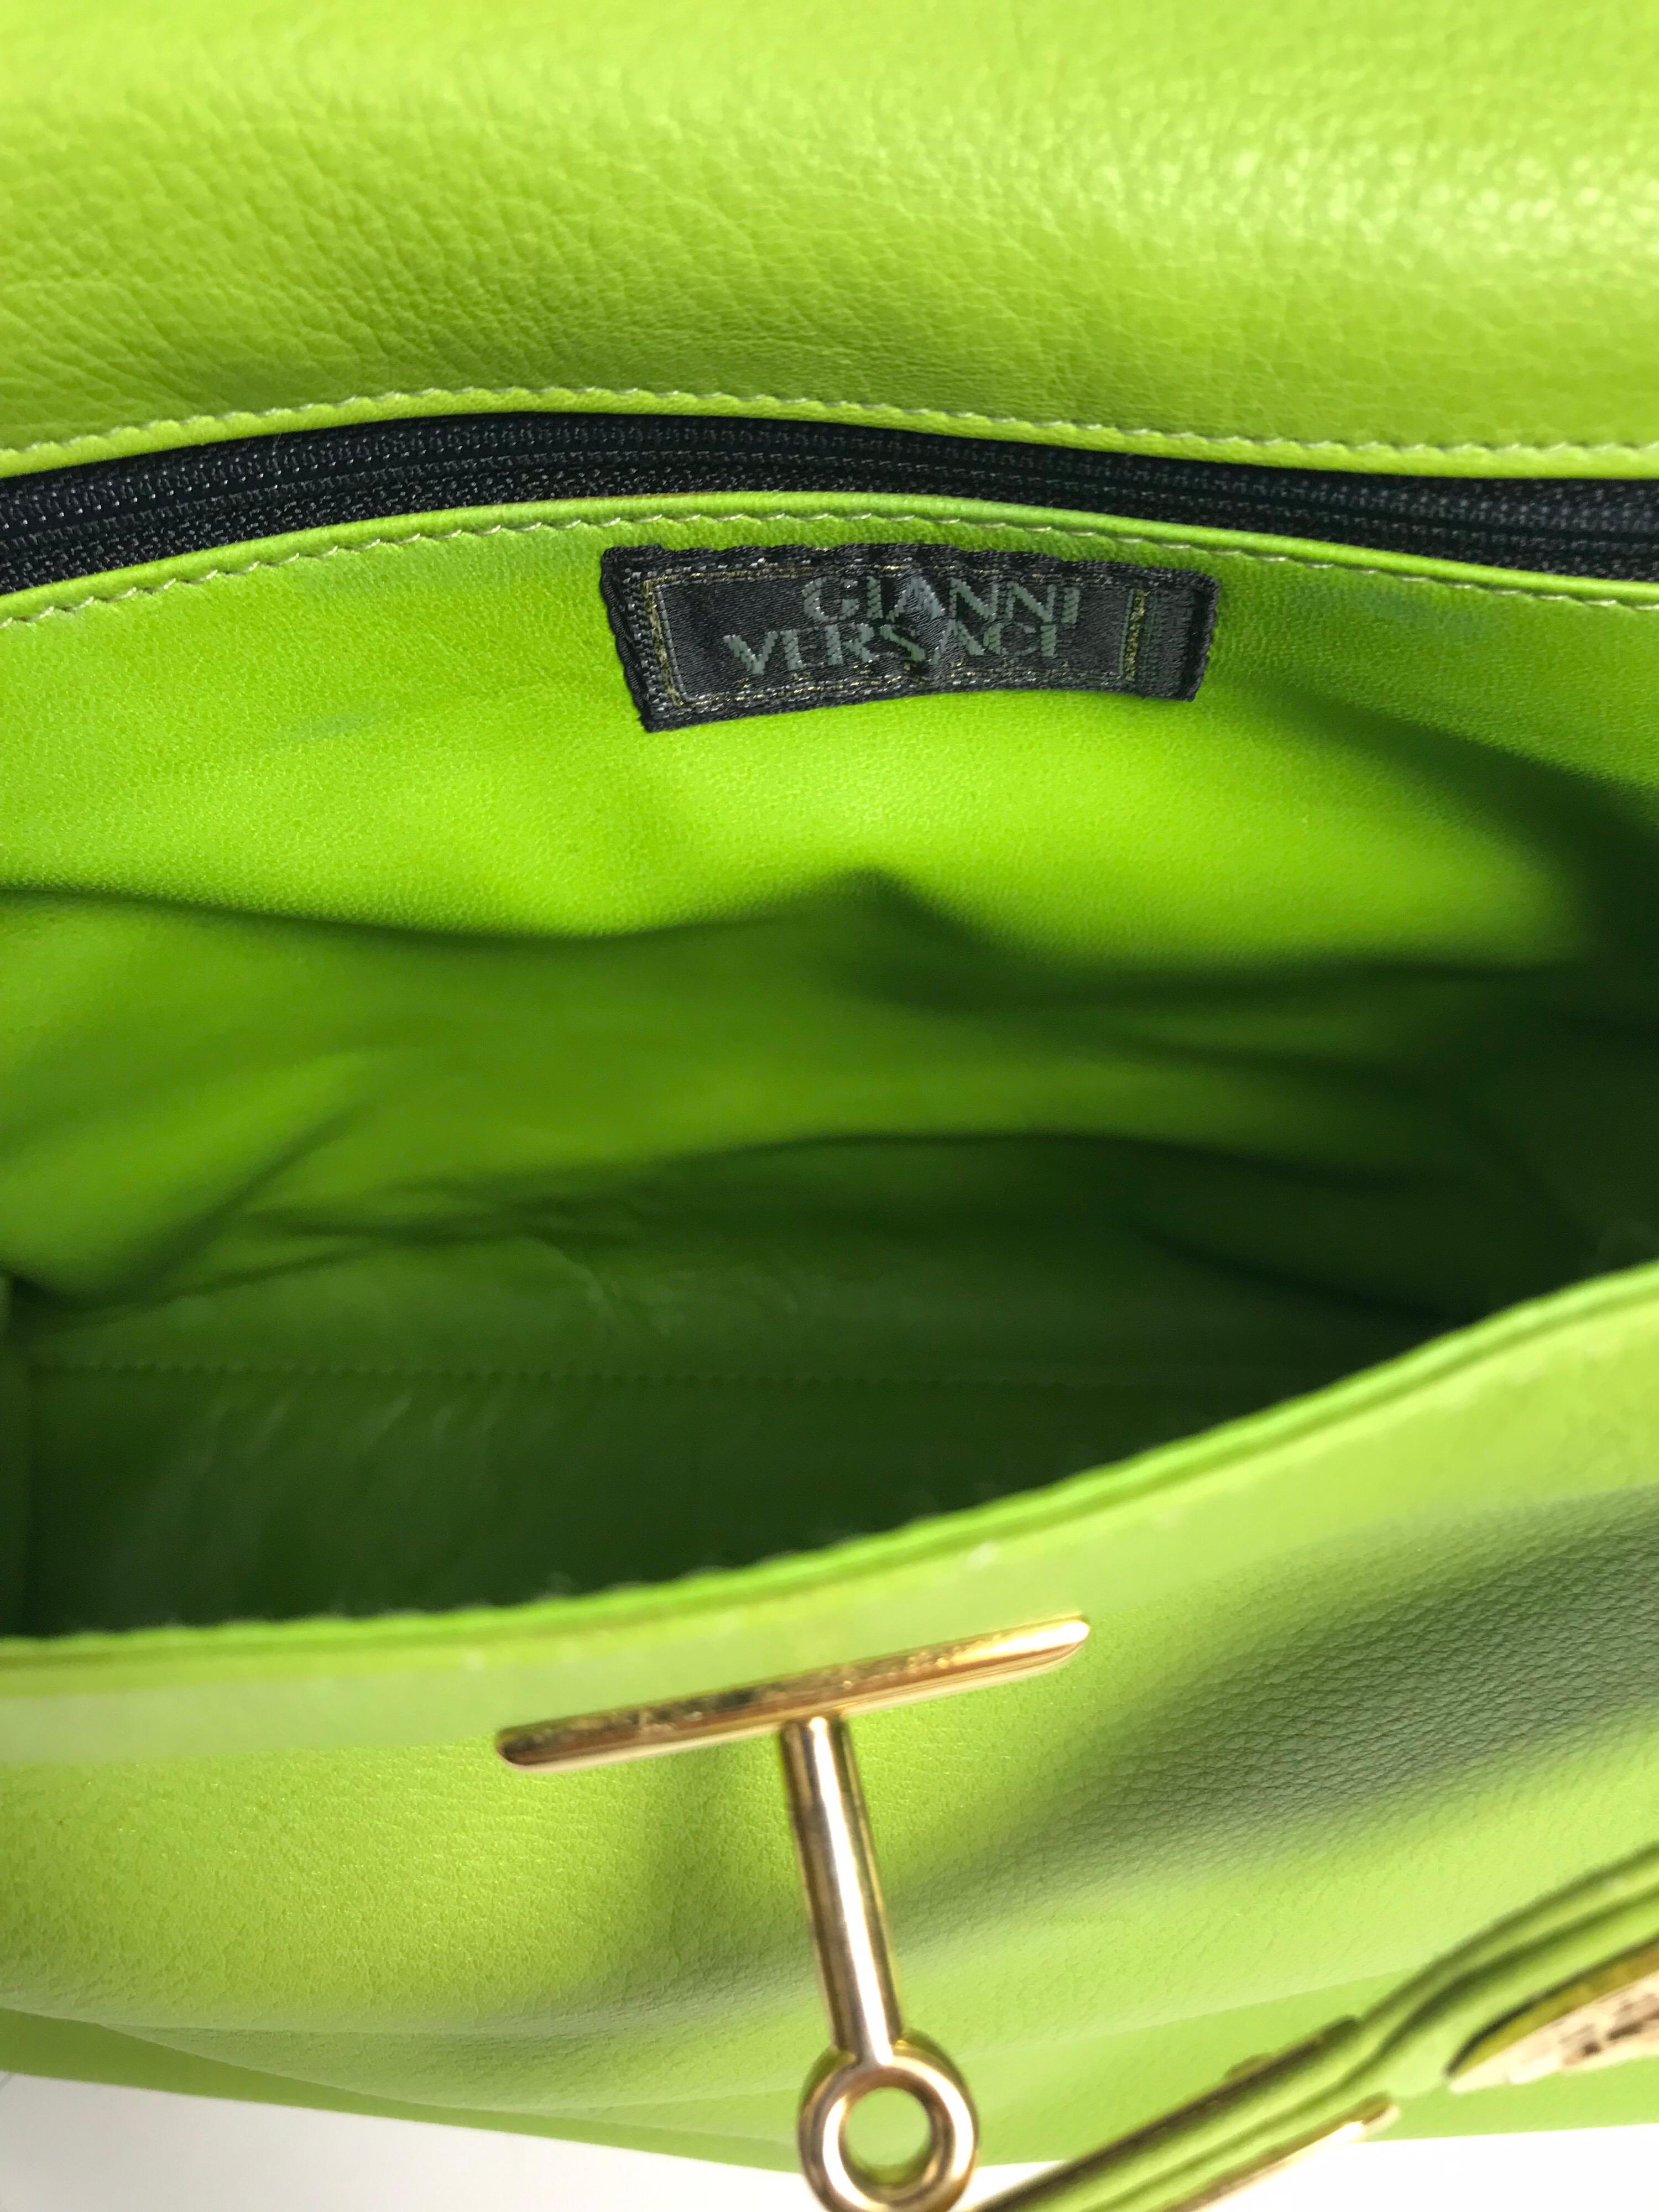 Green 1990s Gianni Versace Lime Leather Kelly Bag